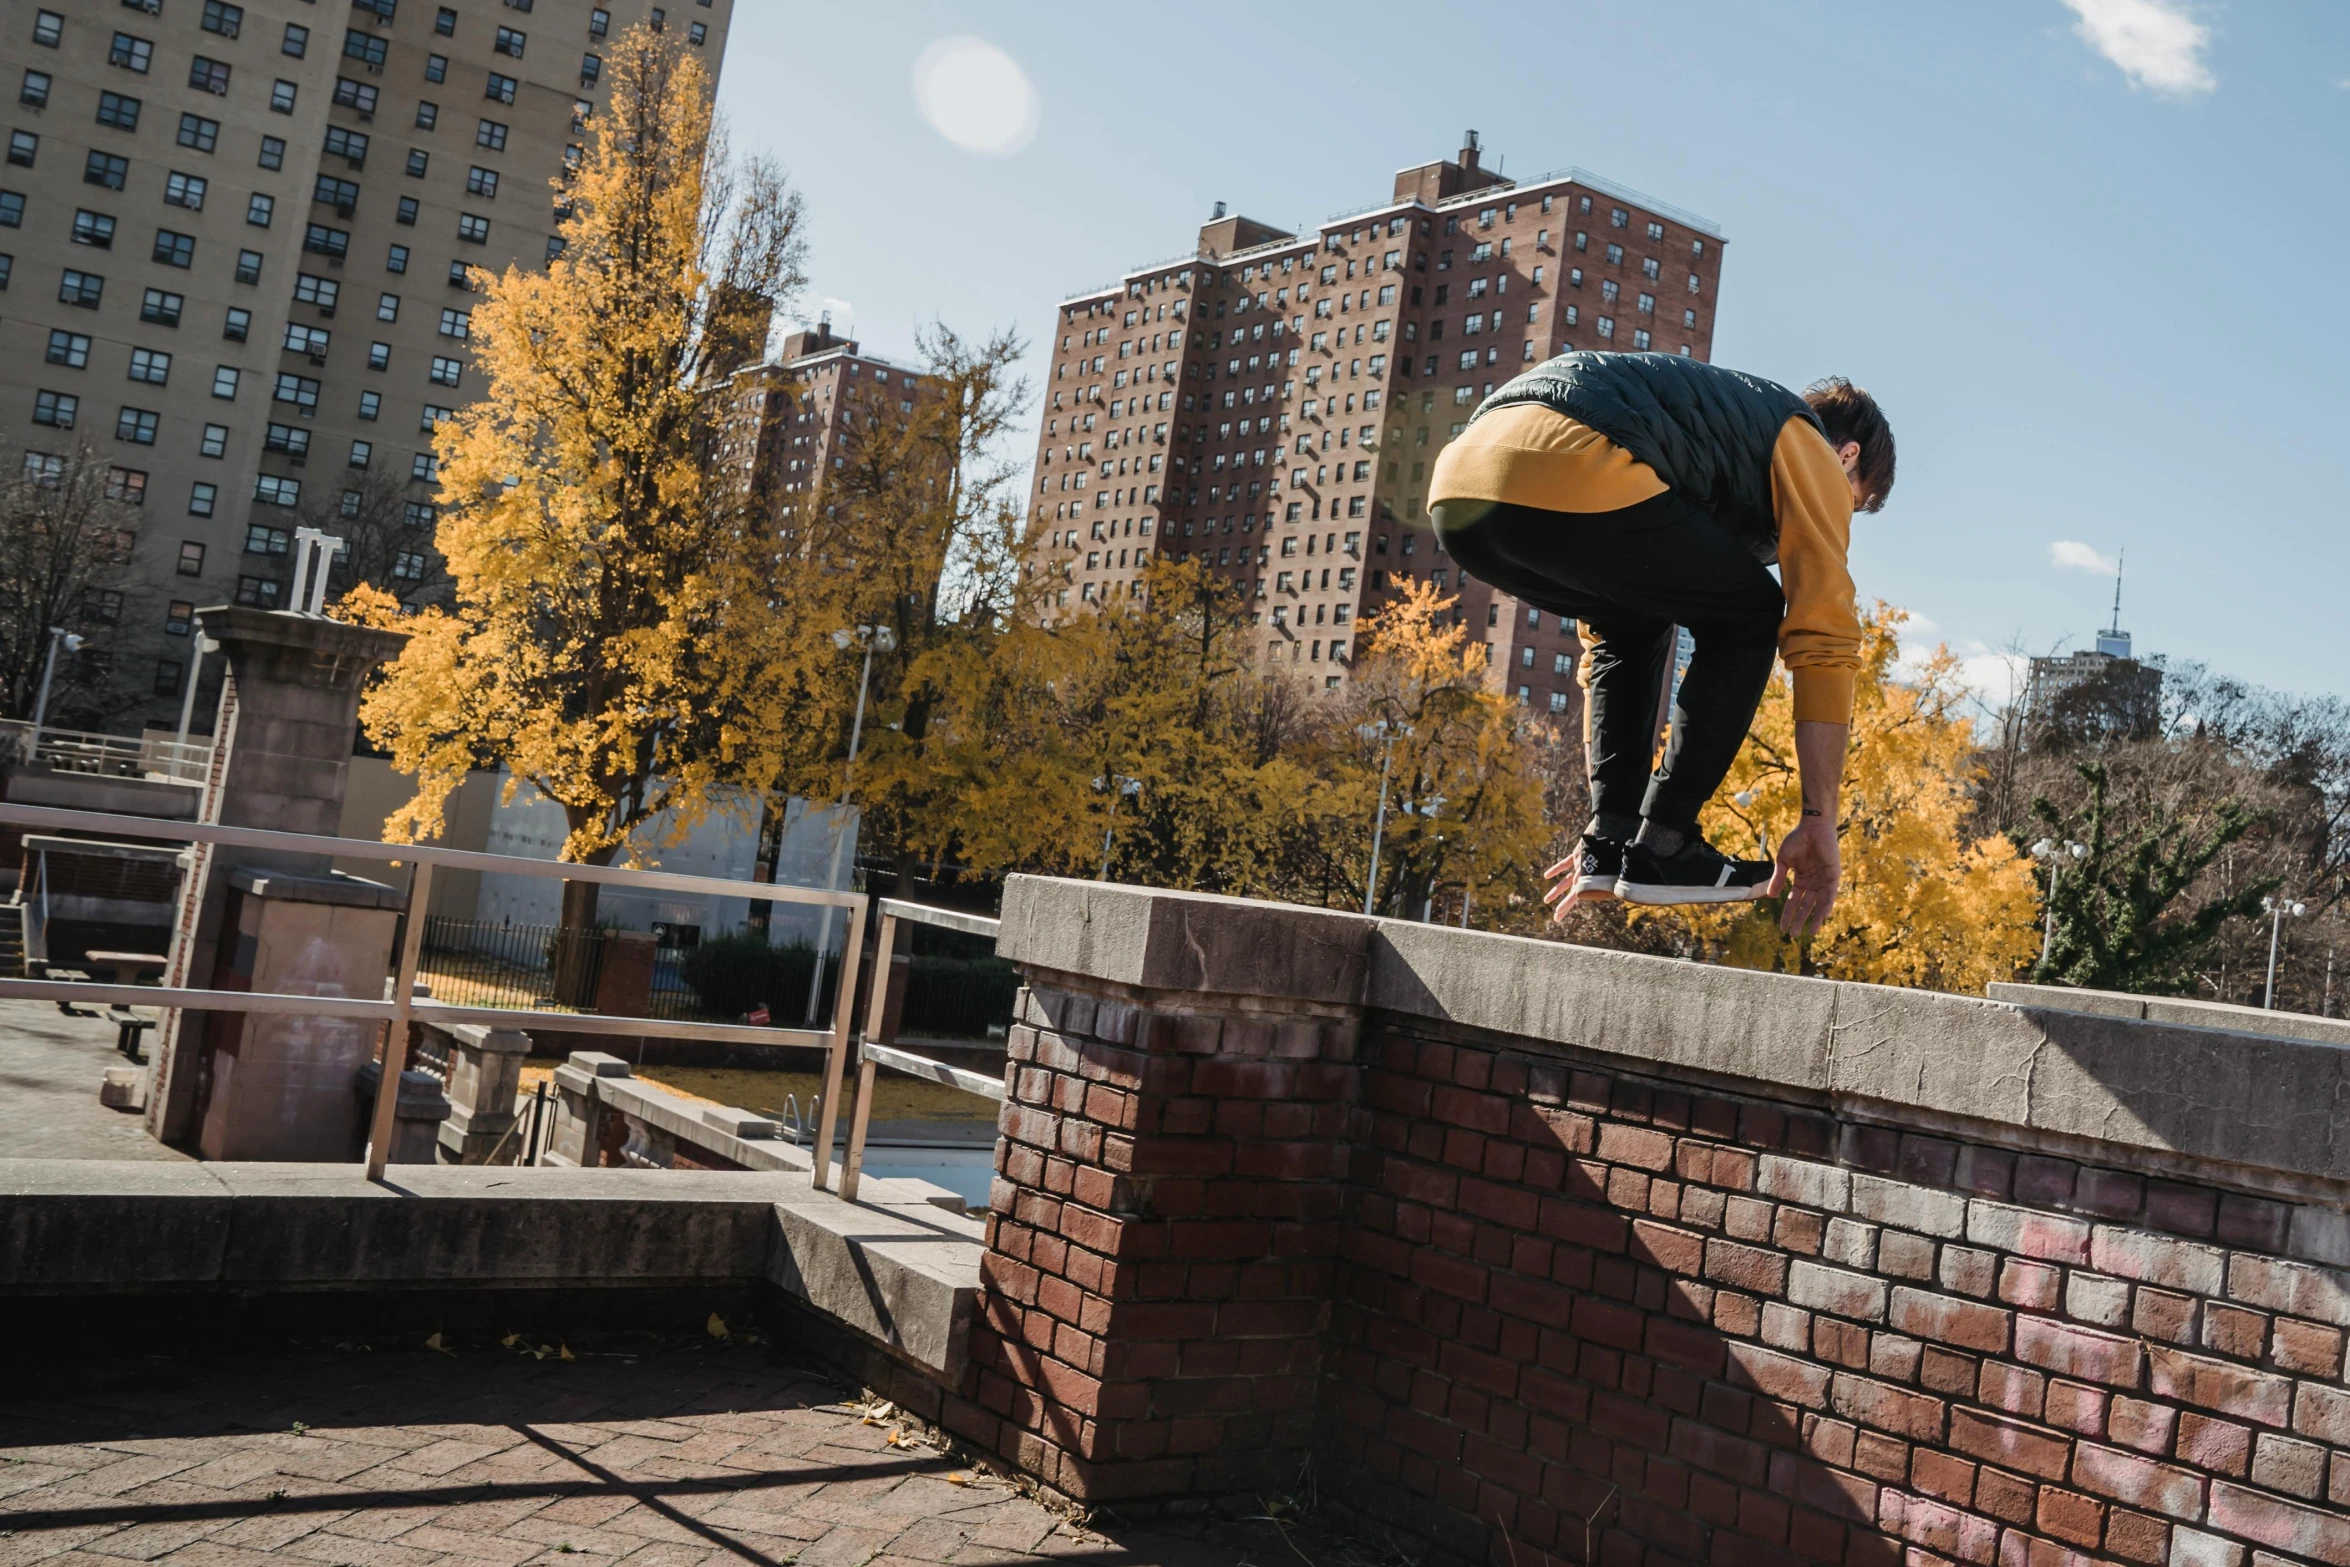 a man flying through the air while riding a skateboard, by William Berra, unsplash, lush brooklyn urban landscaping, mid fall, structure : kyle lambert, ignant